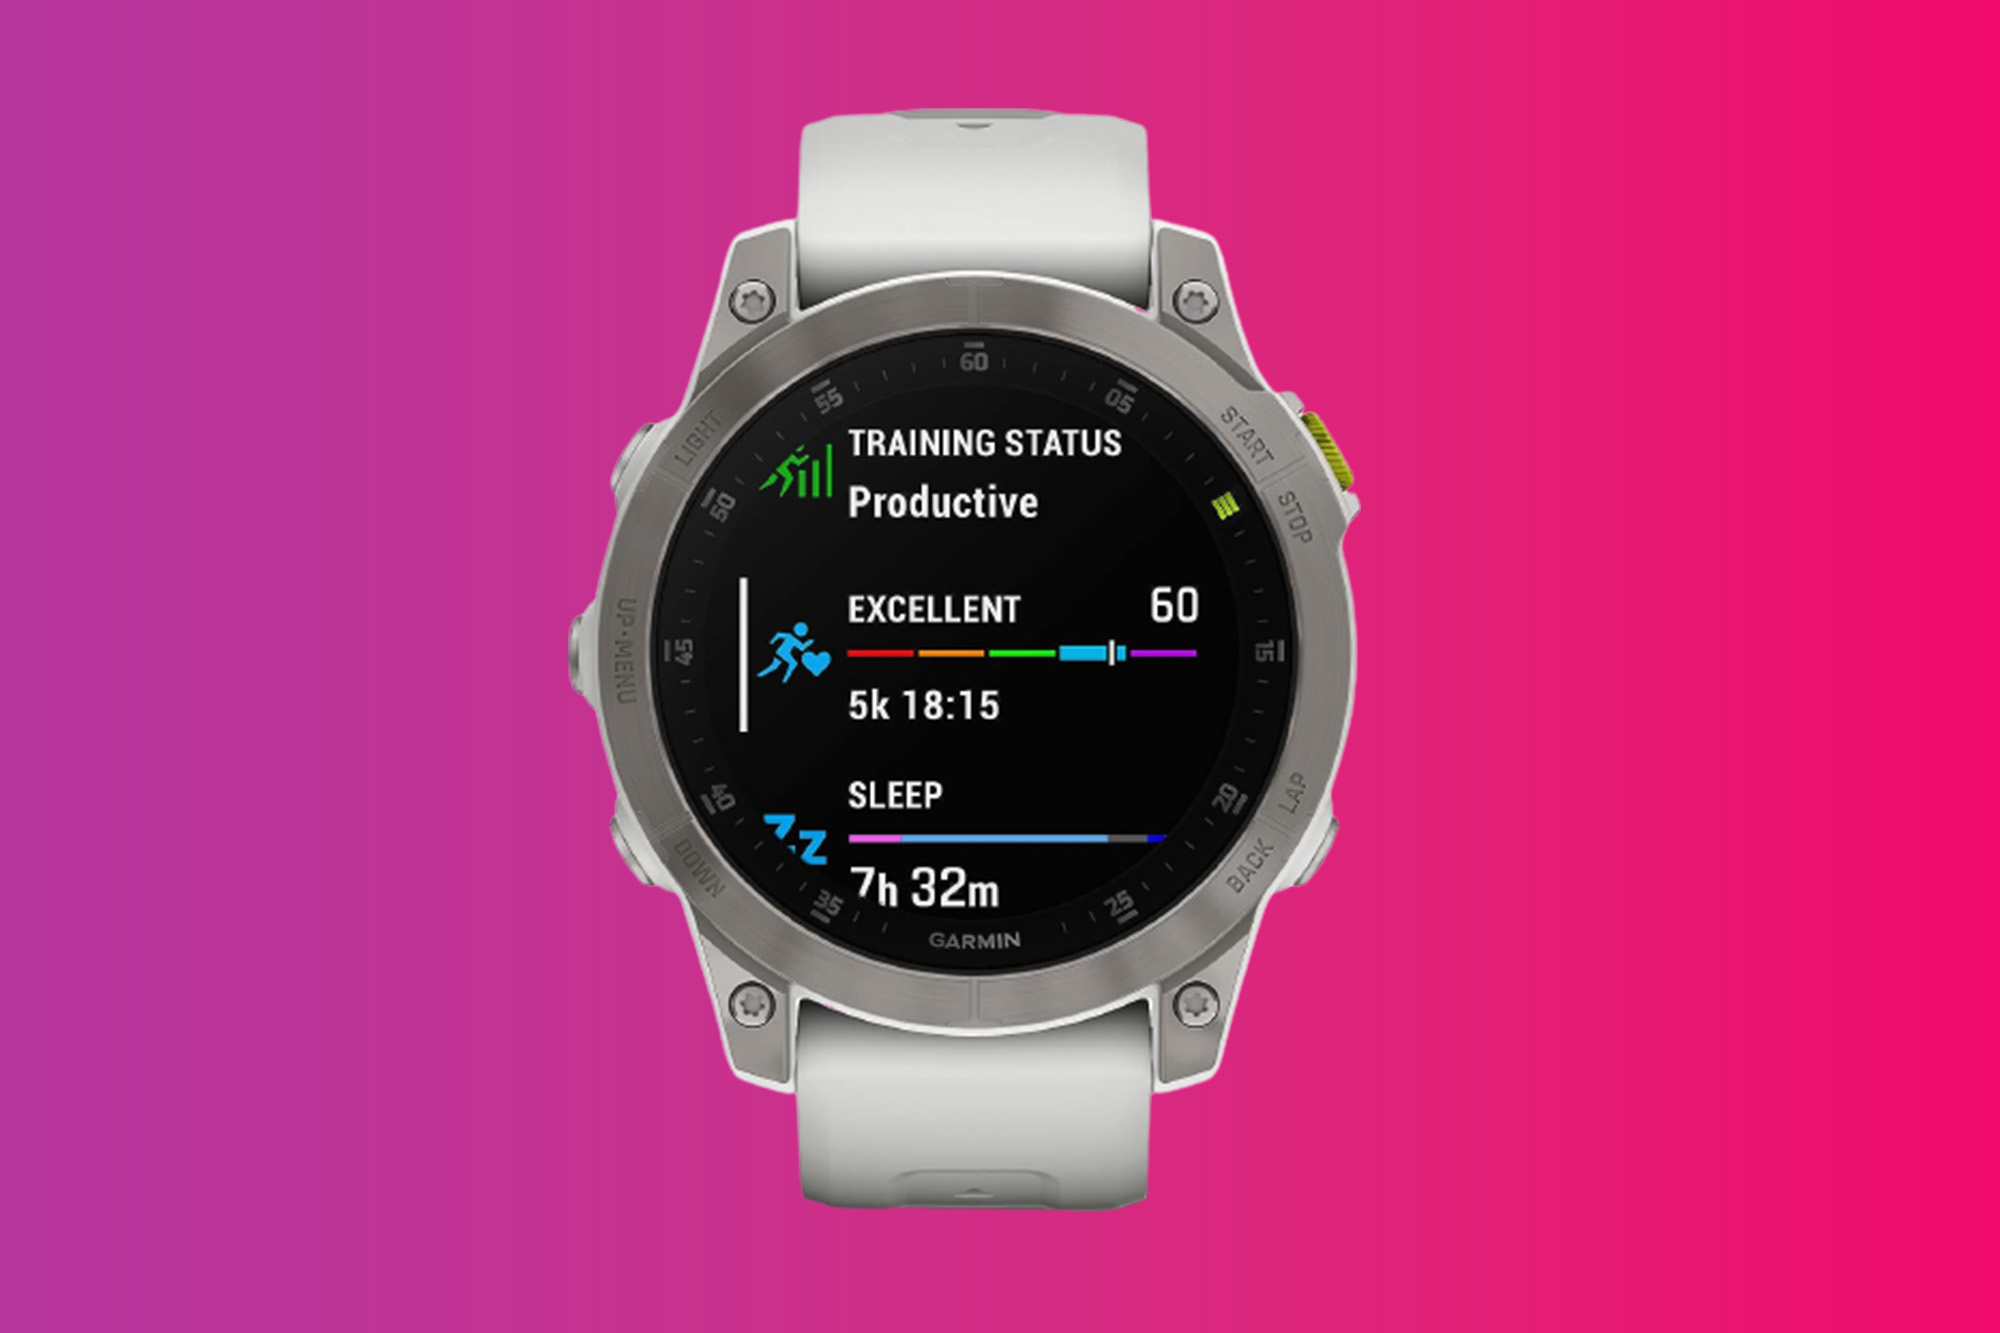 It’s time to save $200 on Garmin’s best smartwatch at Amazon